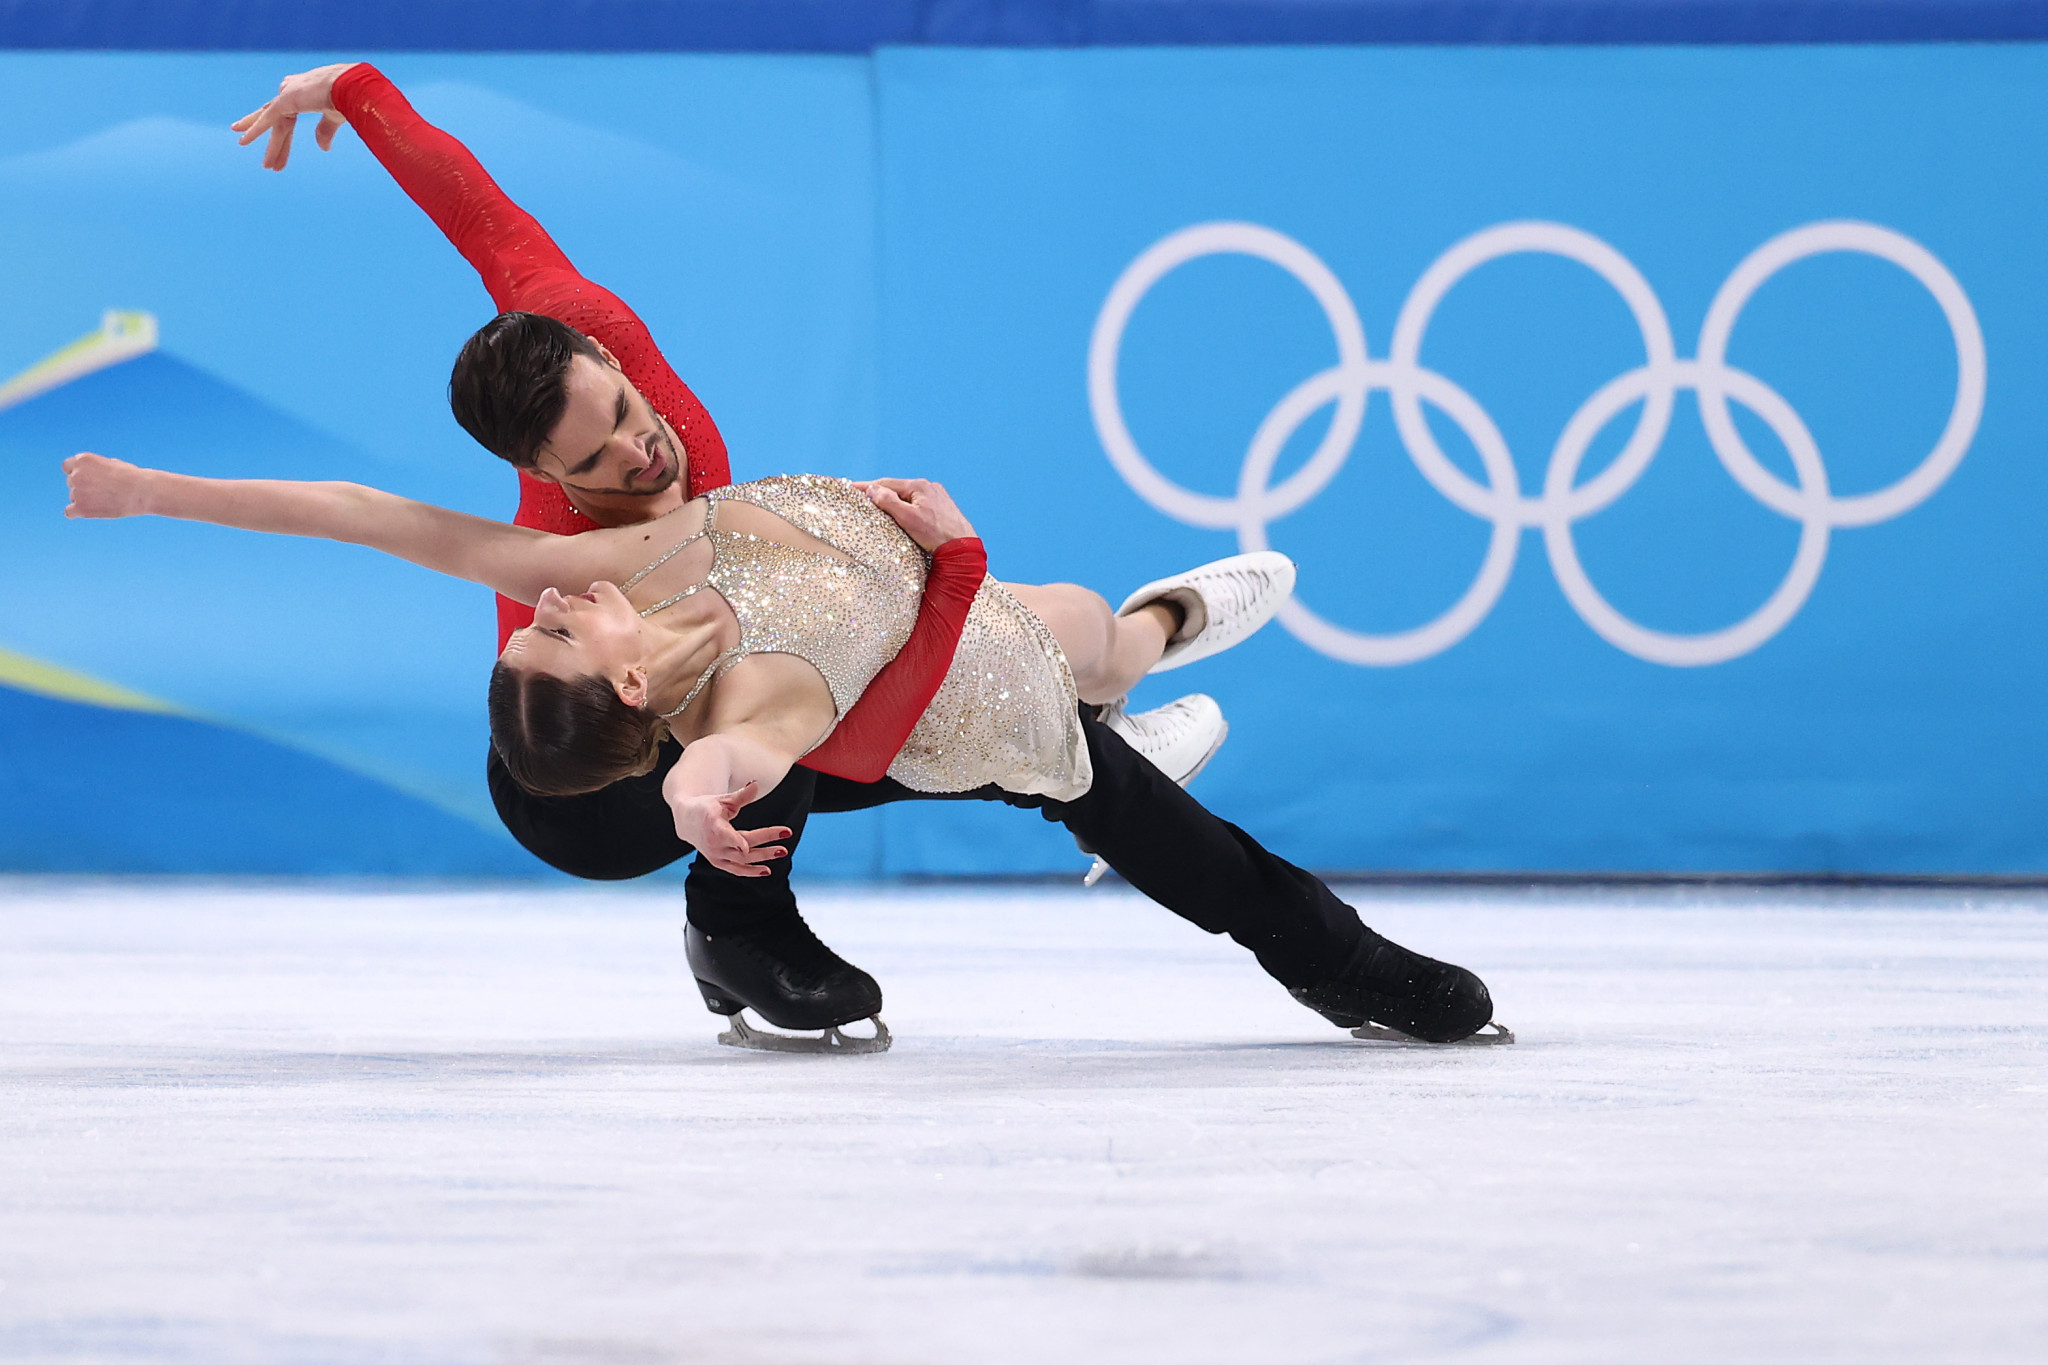 Gabriella Papadakis and Guillaume Cizeron, in red, won their first Olympic gold medal at Beijing 2022 ©Getty Images